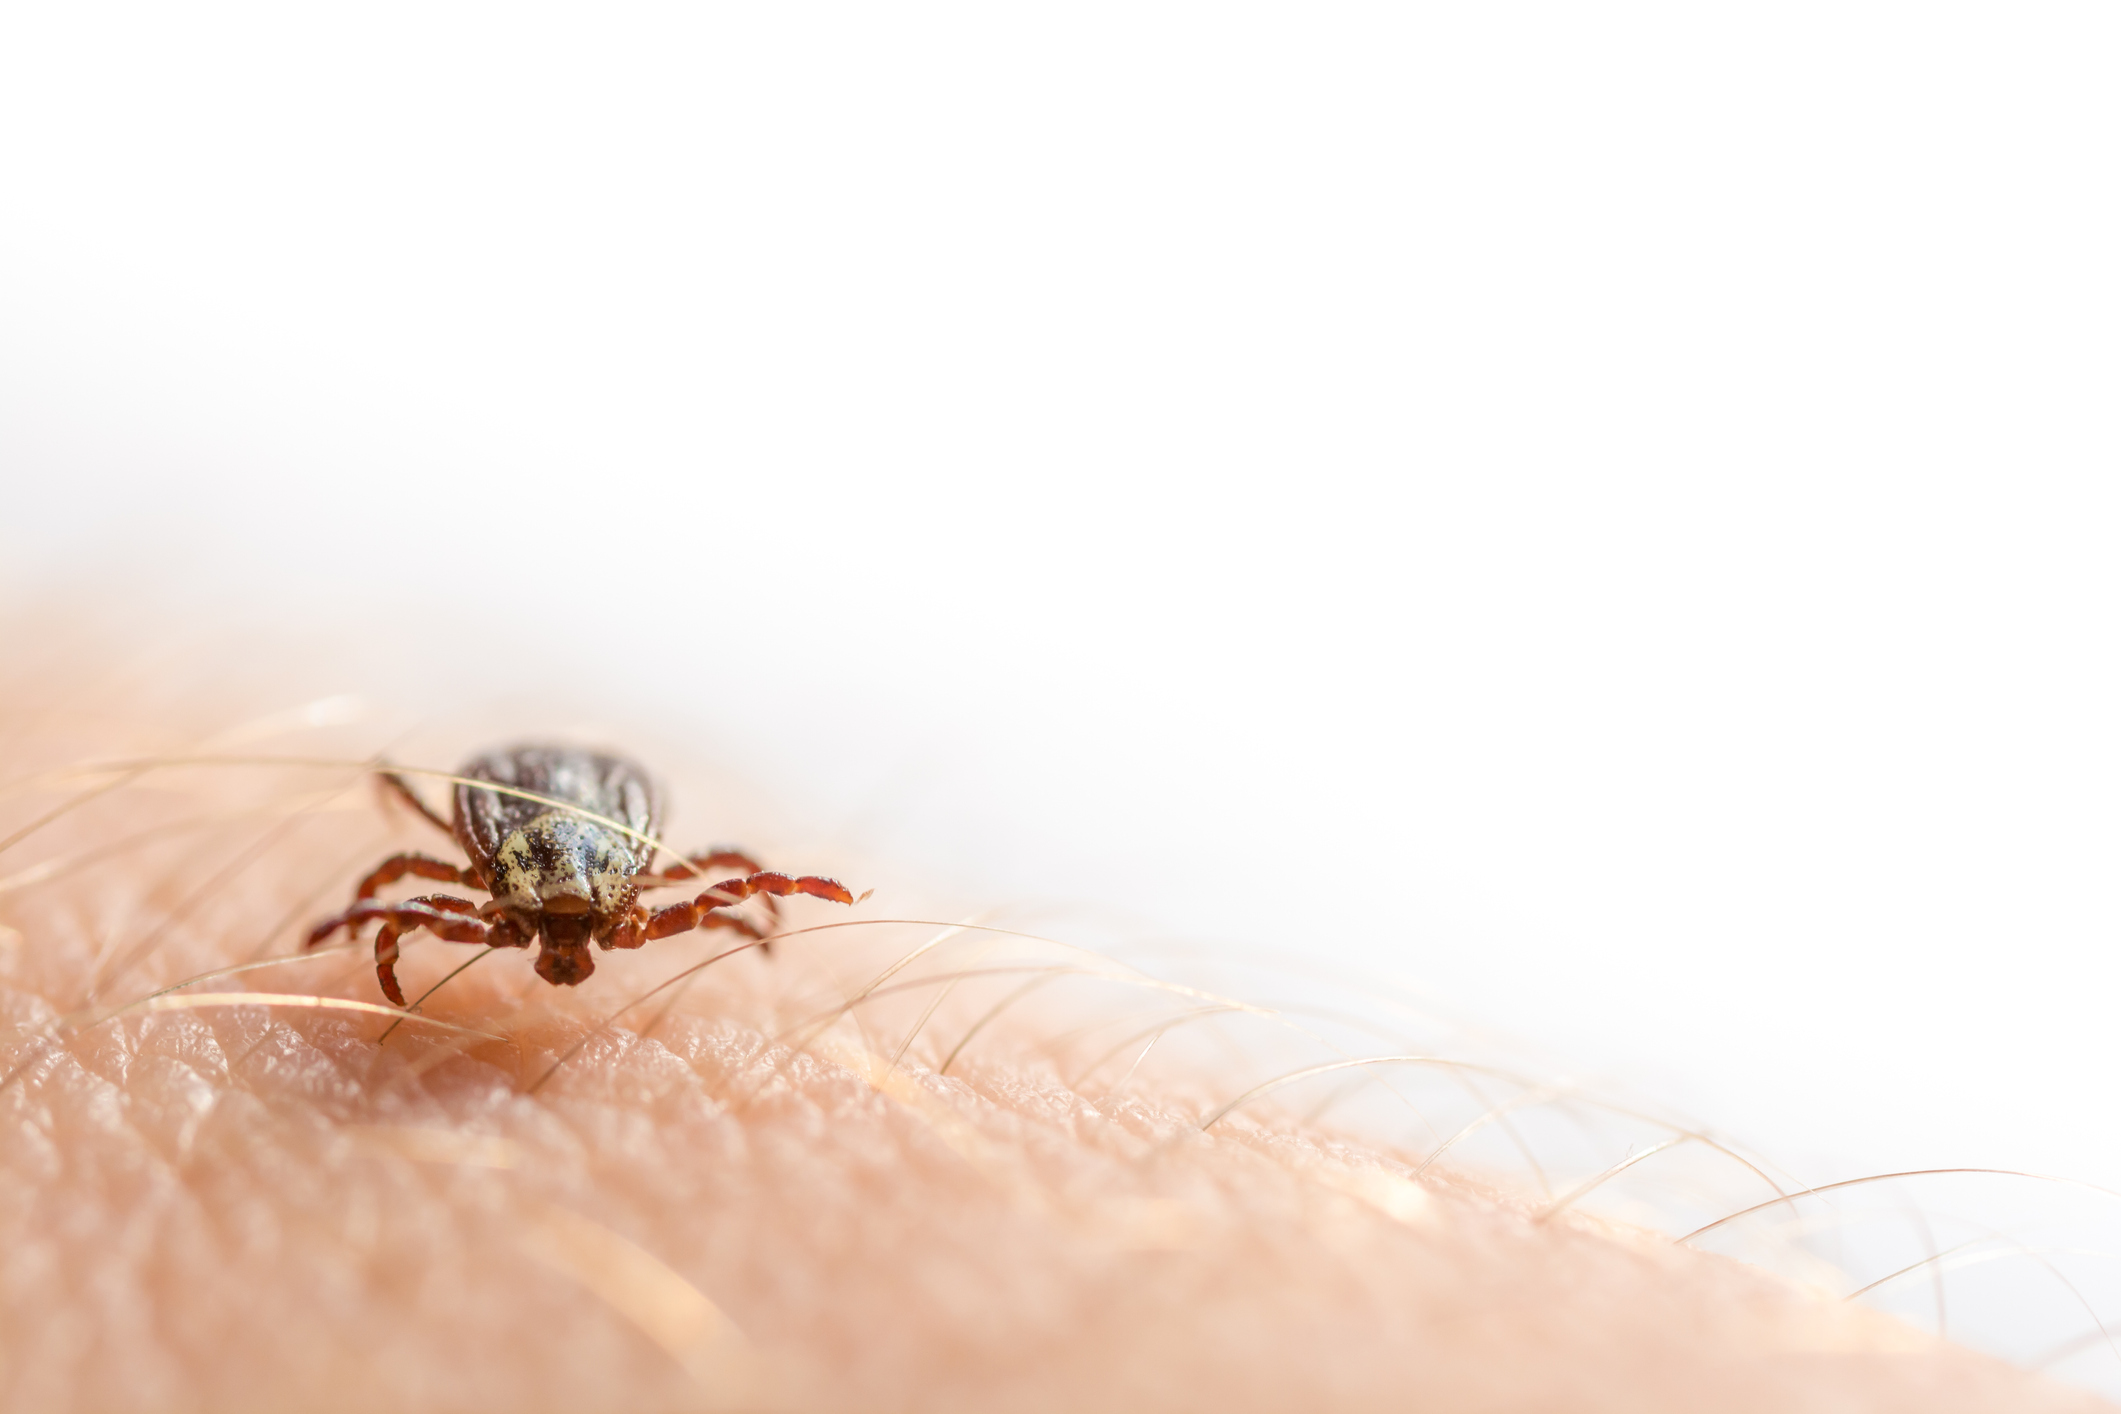 You are currently viewing Case Study: How a Triage Nurse Uses Protocols for Tick Bites